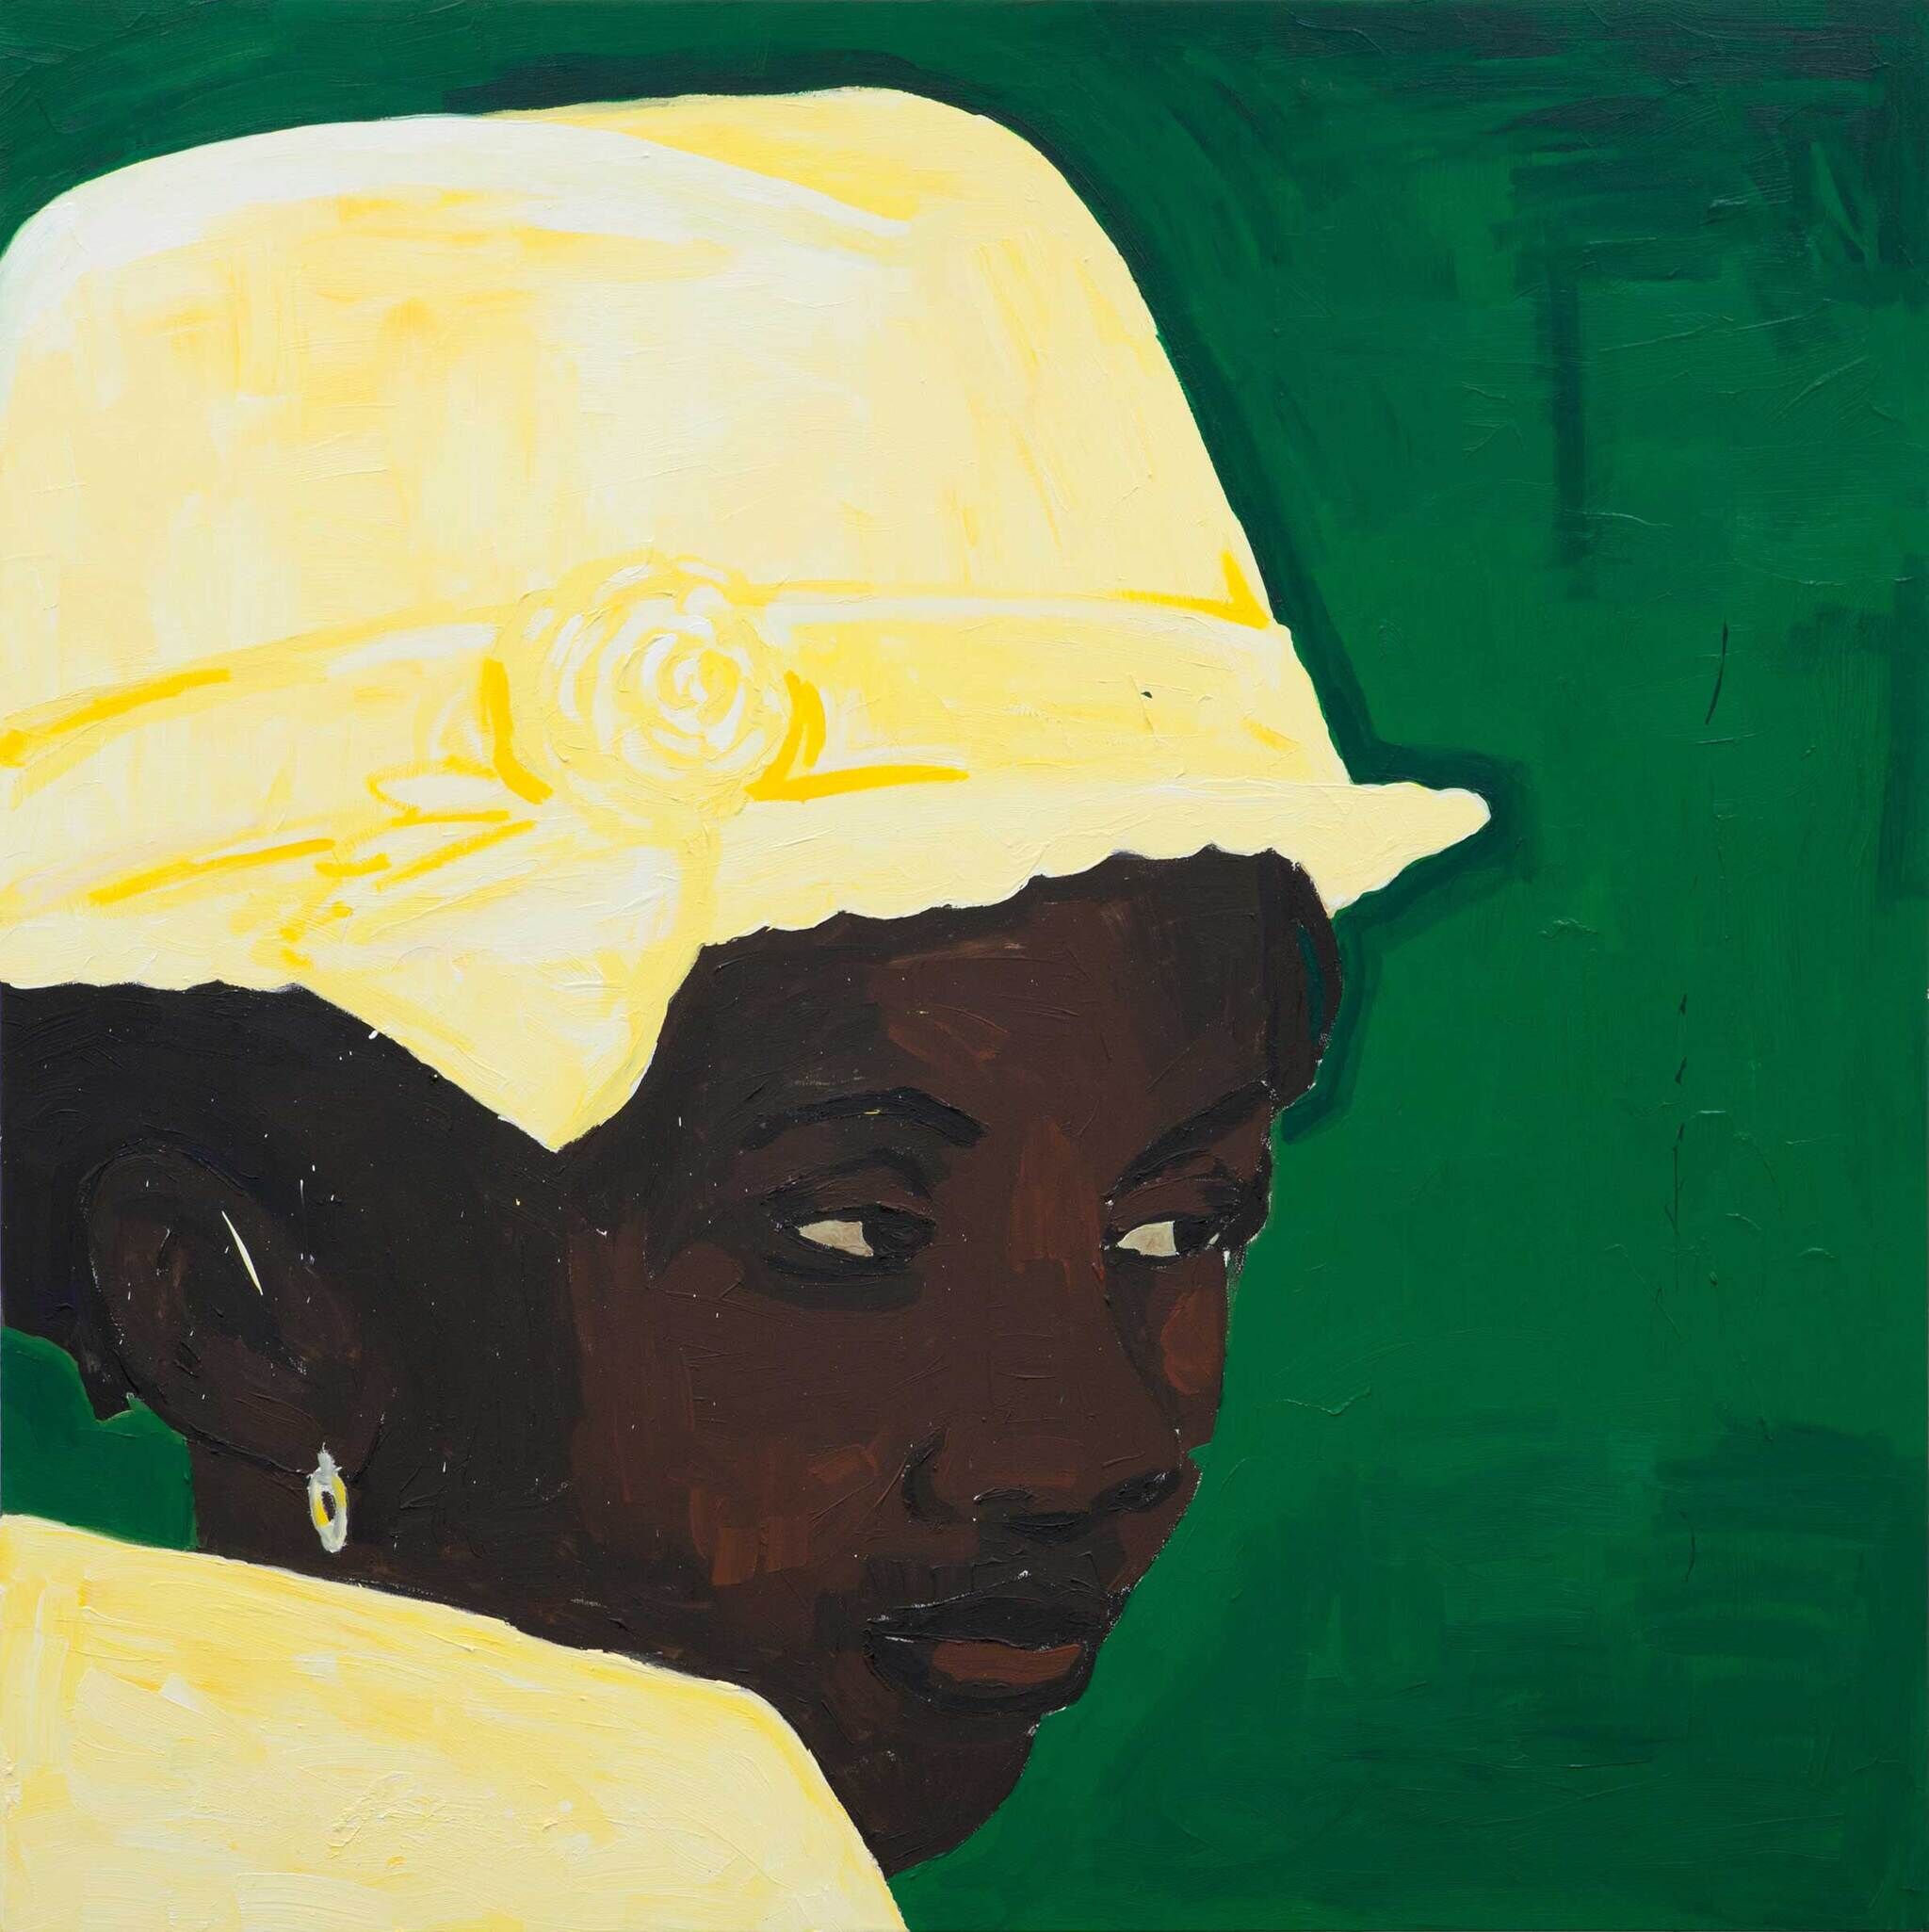 A close up view of the face of a Black woman wearing a yellow hat and jacket against a green background.